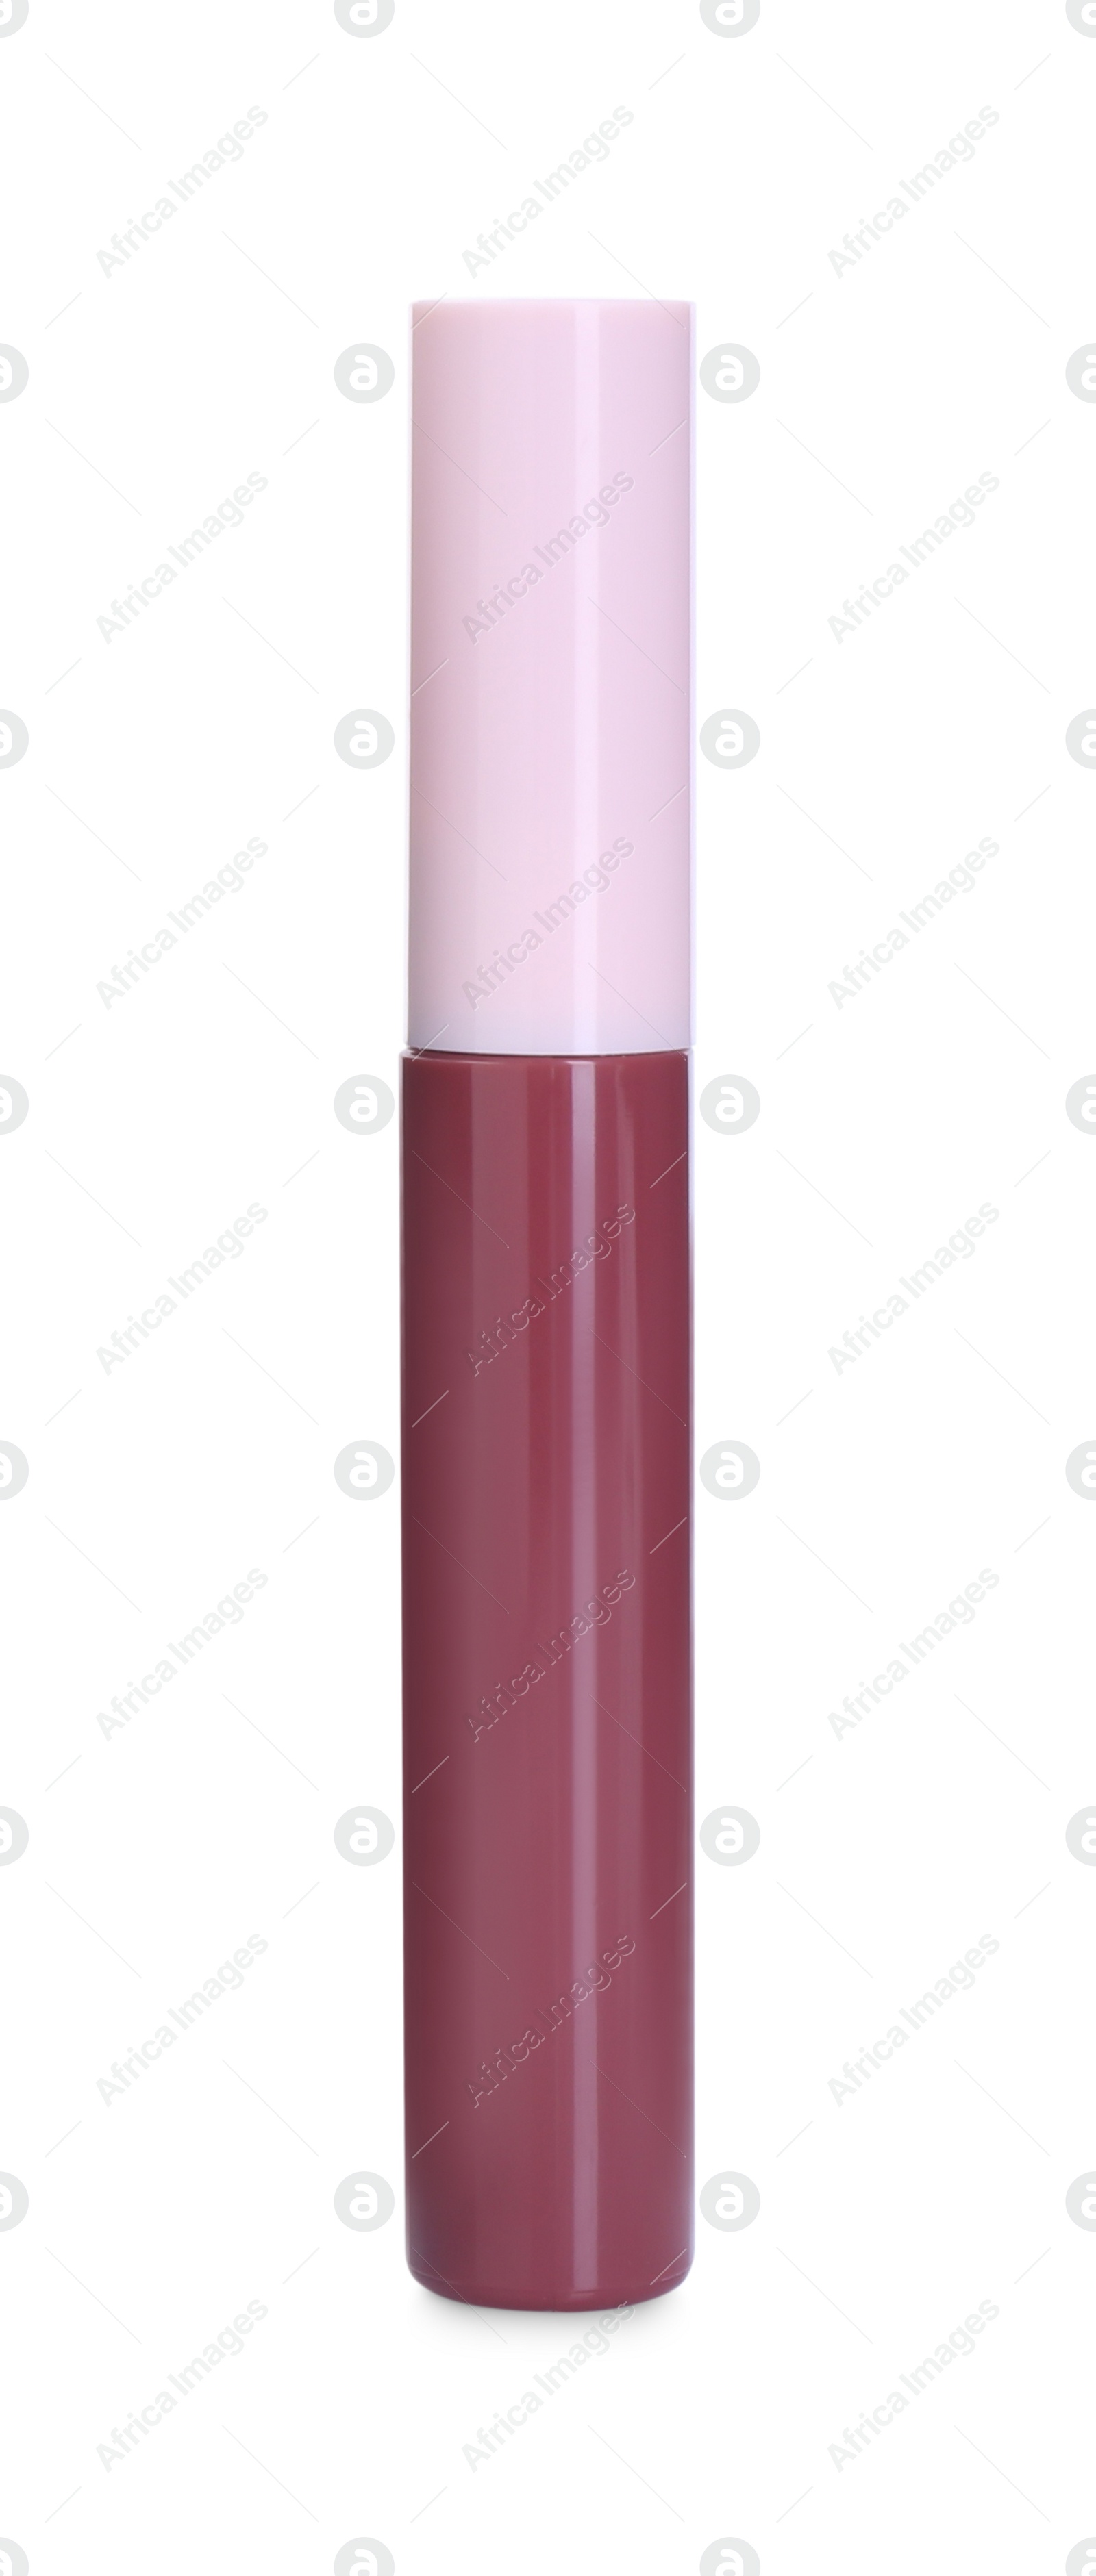 Photo of One bright lip gloss isolated on white